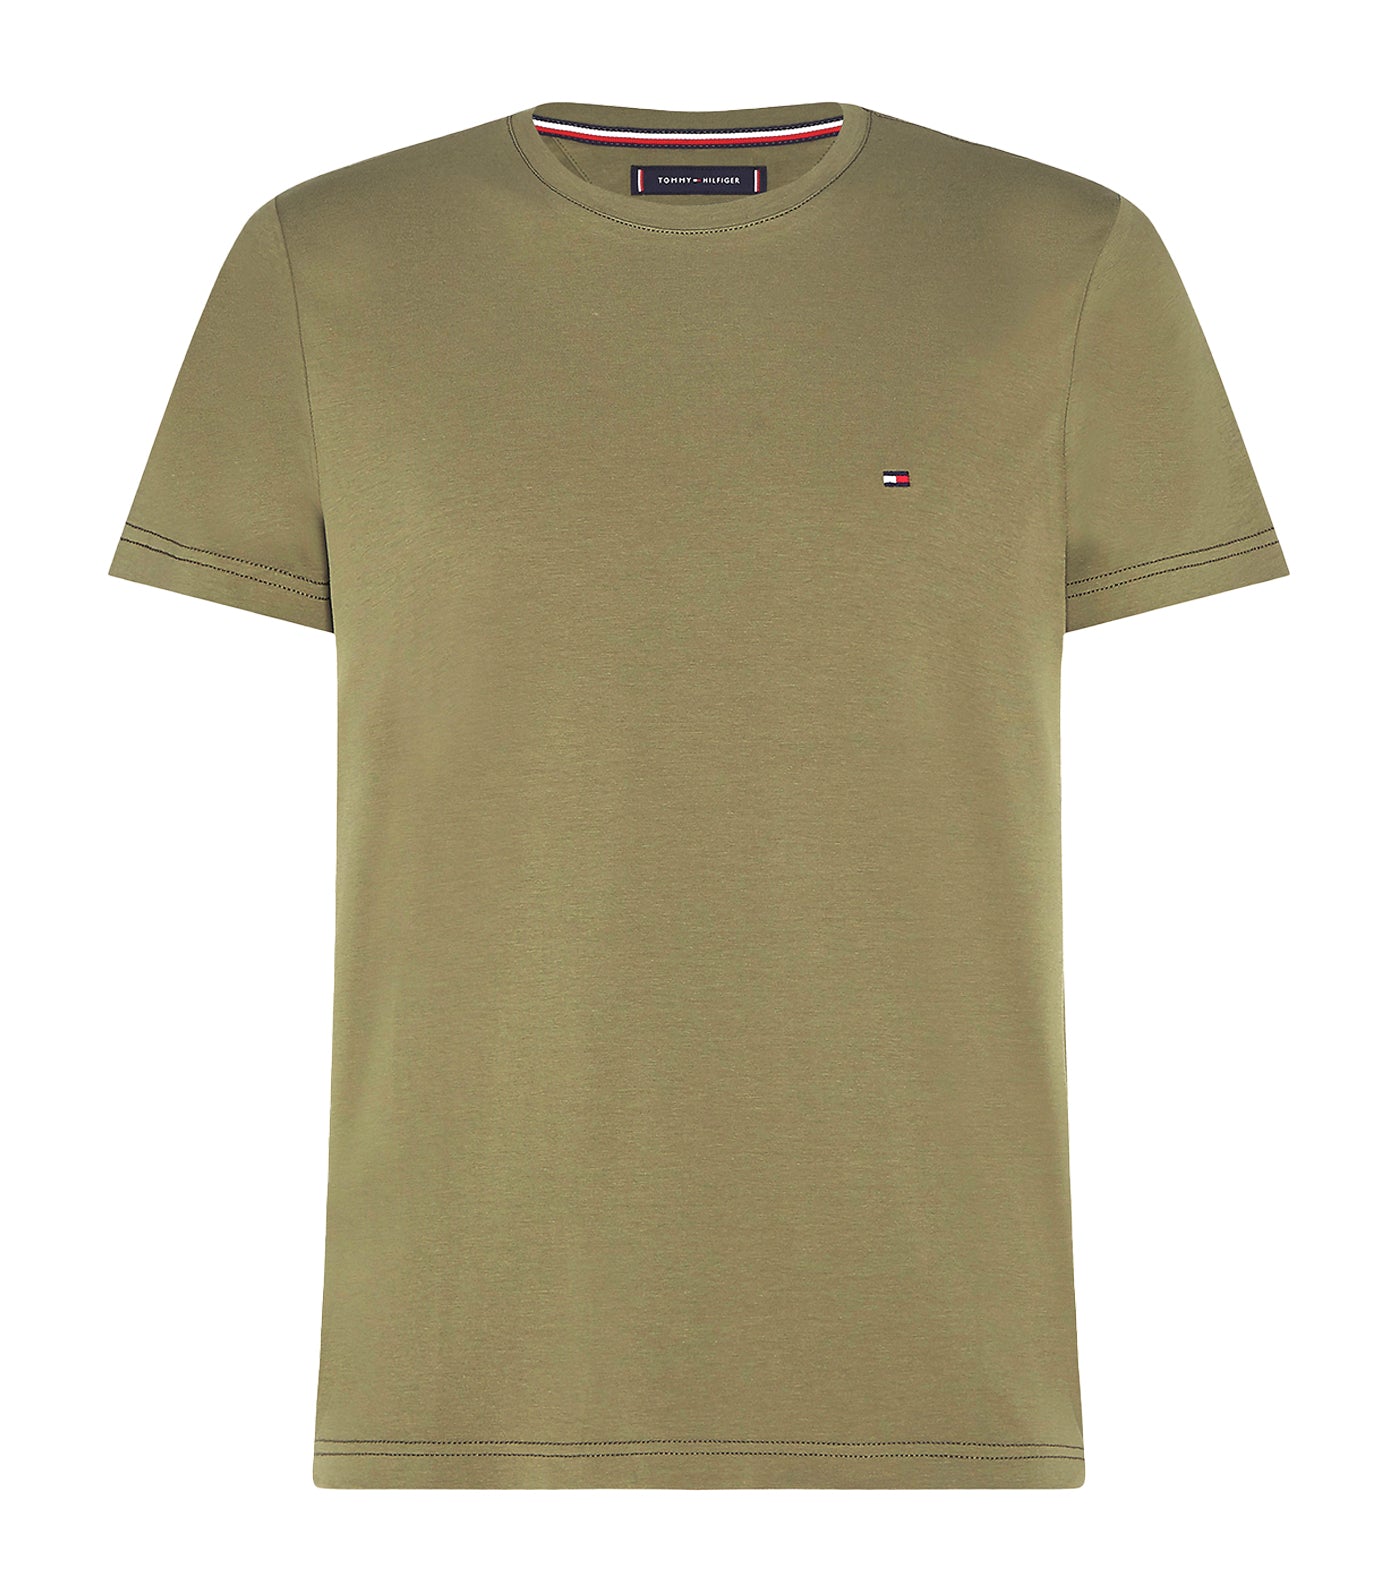 Stretch Slim Fit Tee in Utility Olive